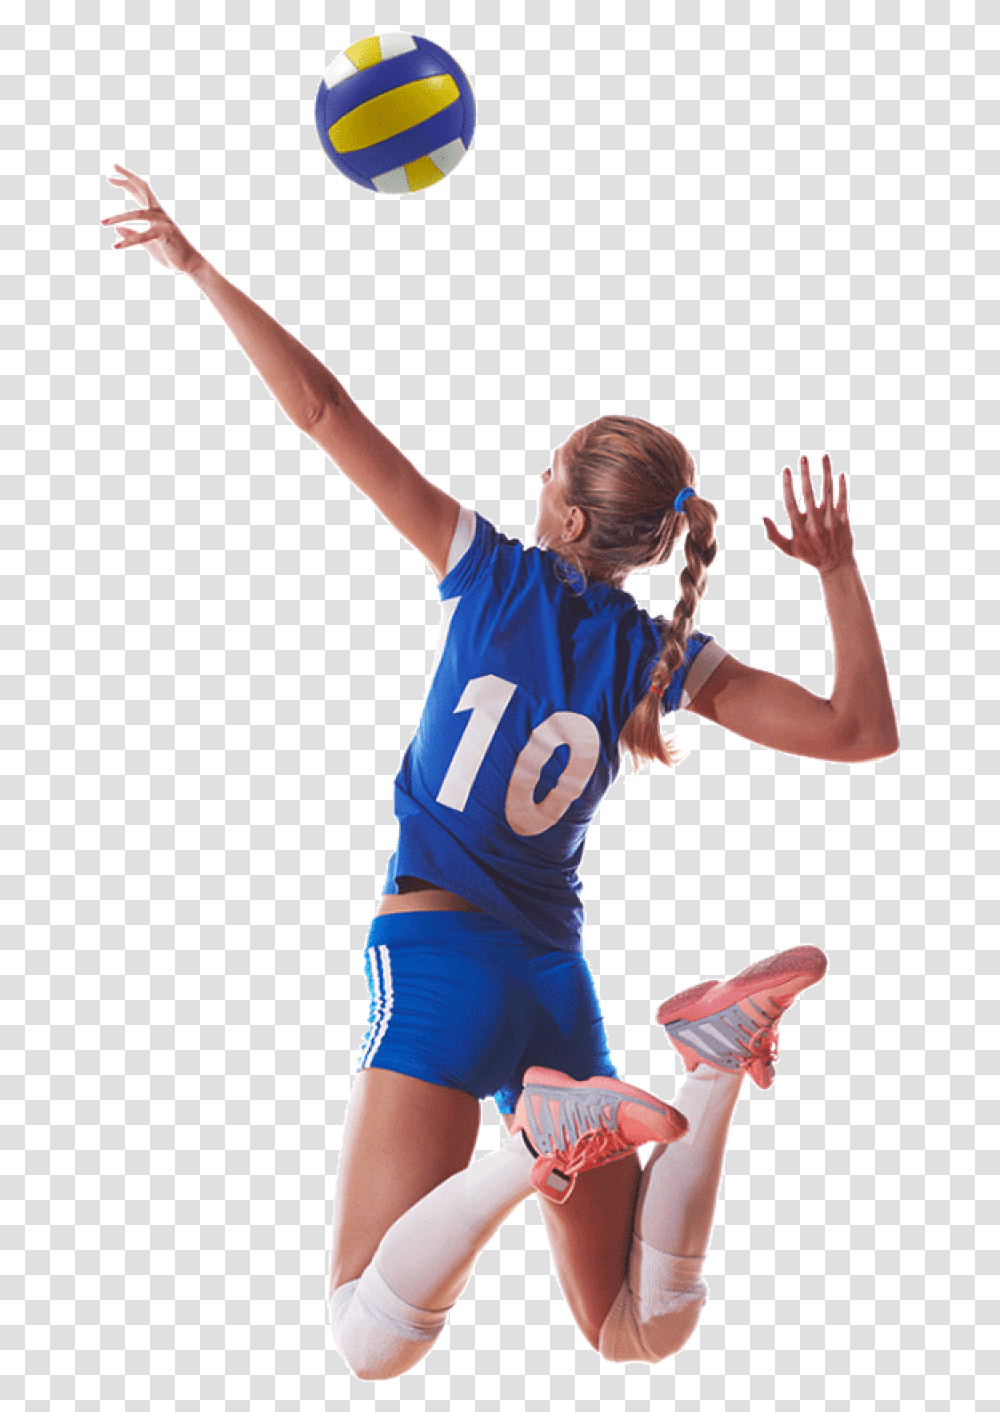 Volleyball Player Image Background Volleyball Player, Clothing, Person, People, Shorts Transparent Png